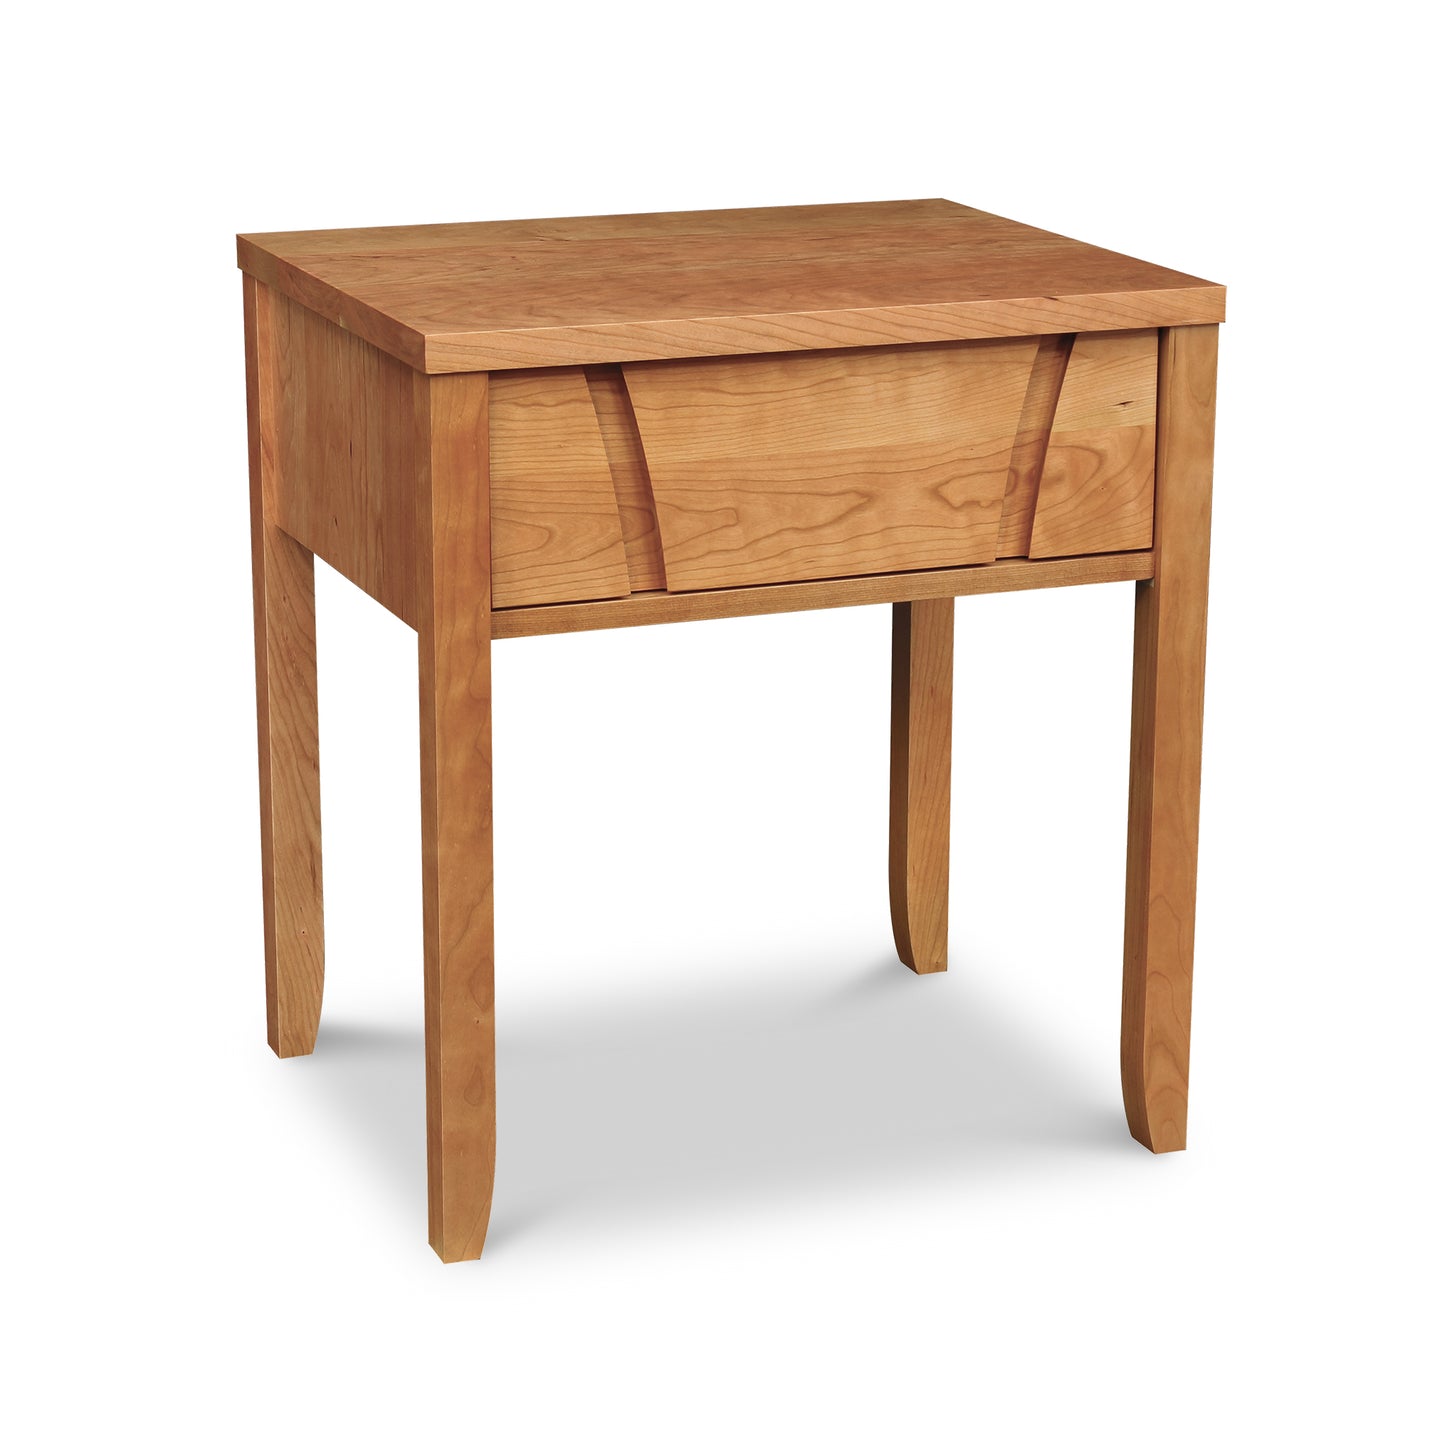 A small hardwood Holland 1-Drawer Nightstand with a unique curved finger pull design by Lyndon Furniture.